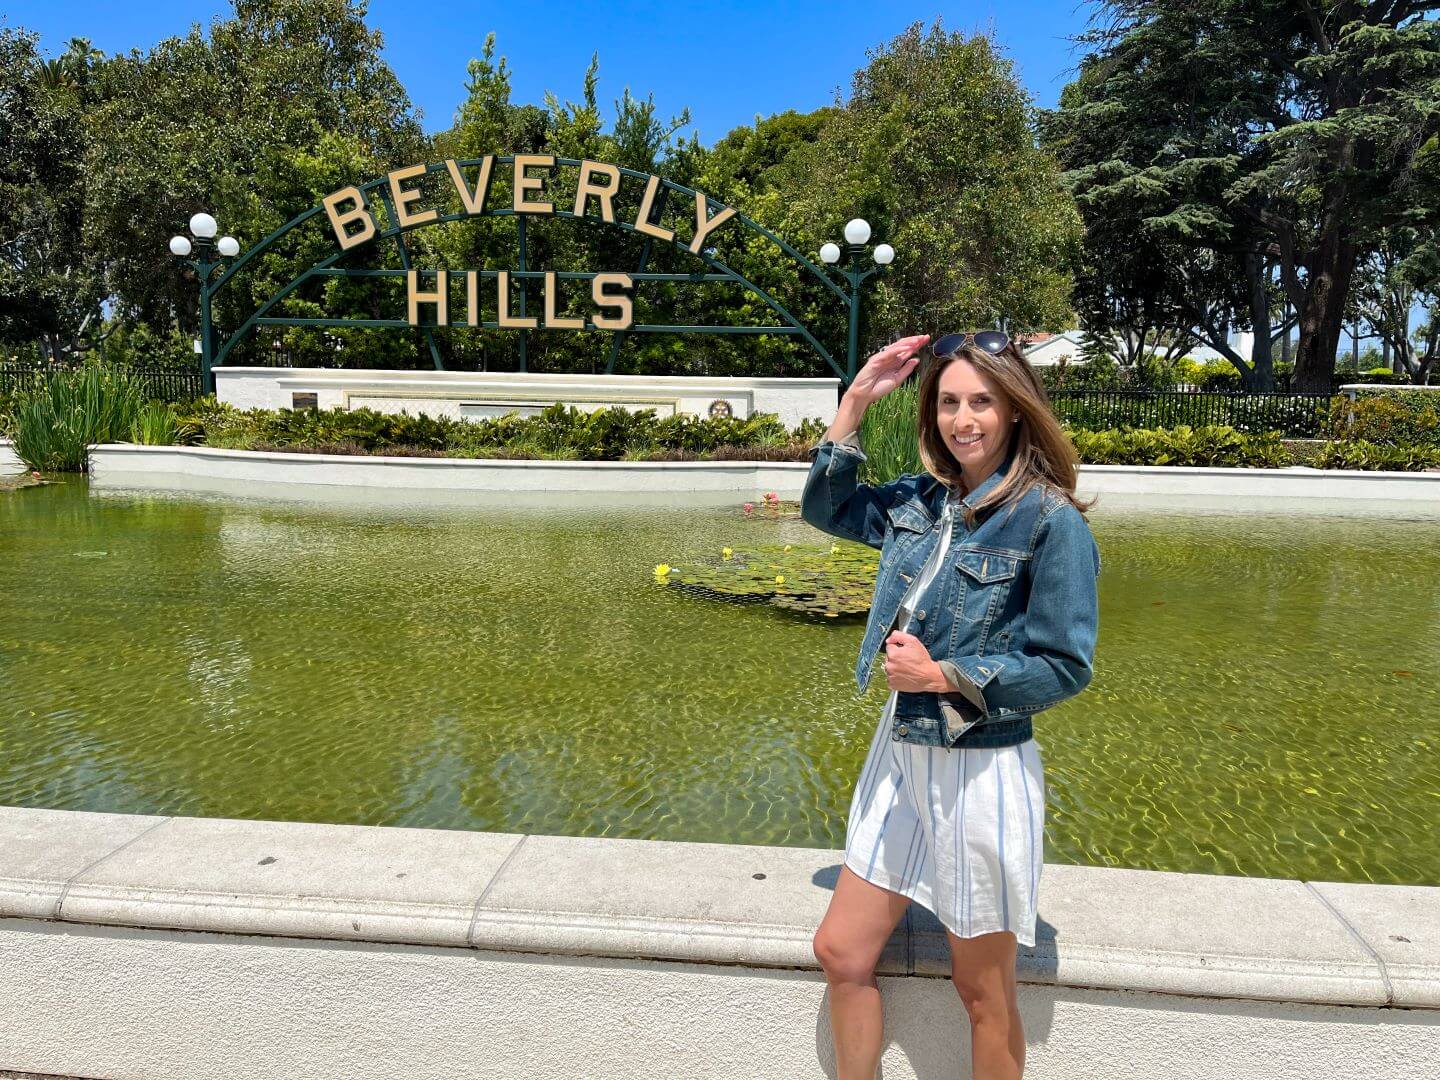 Beverly Hills Department Stores Welcome Chinese Tours With Open